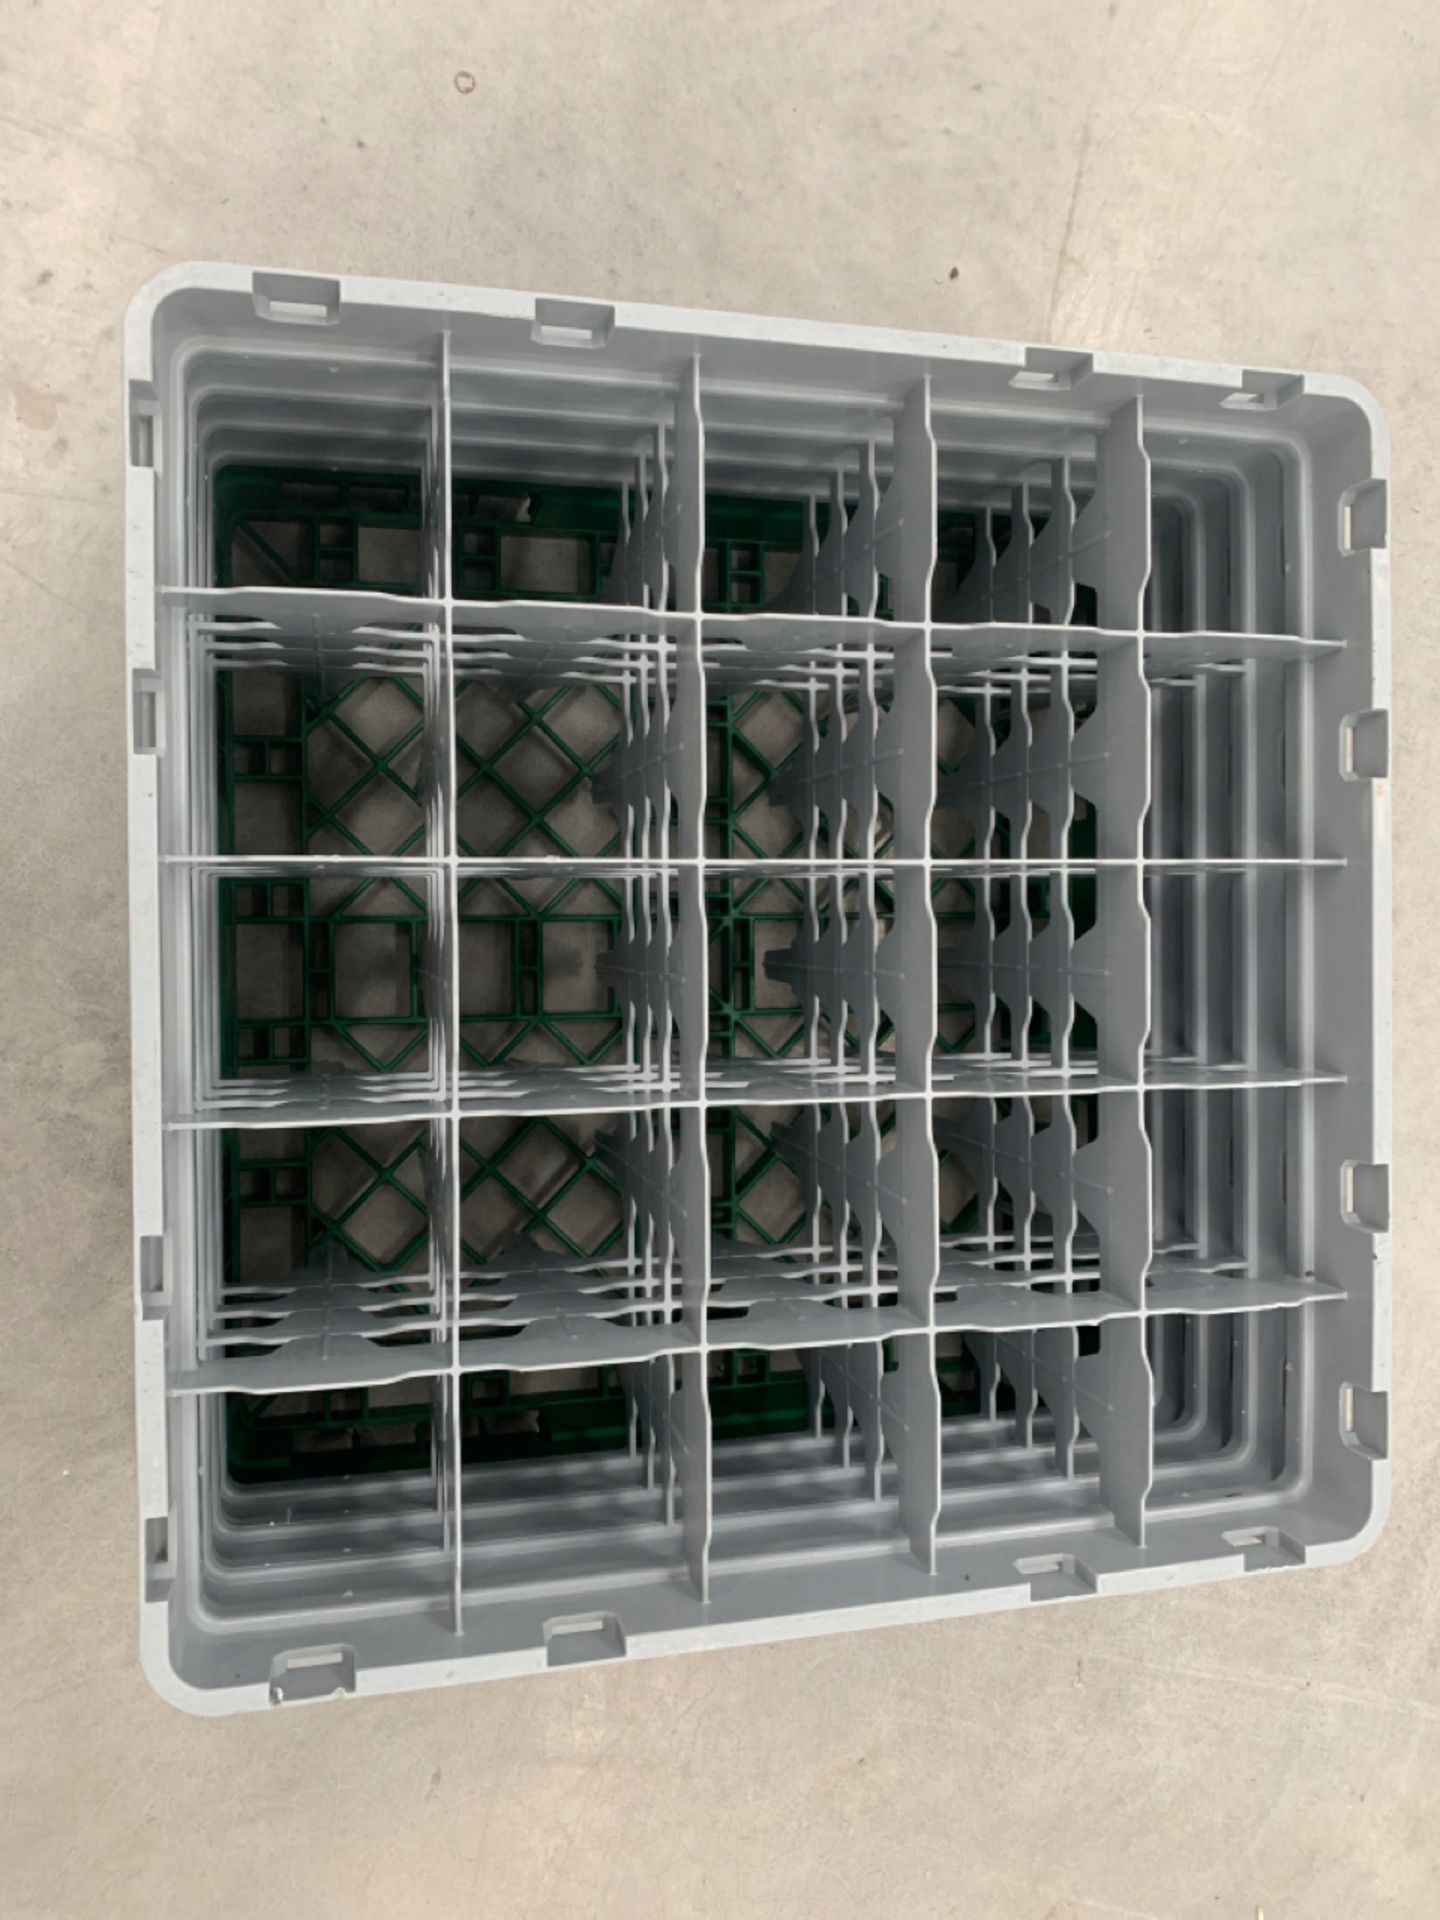 Cambro Camrack Glass Rack 25 Compartments Max Glass Height 215mm - Image 3 of 3